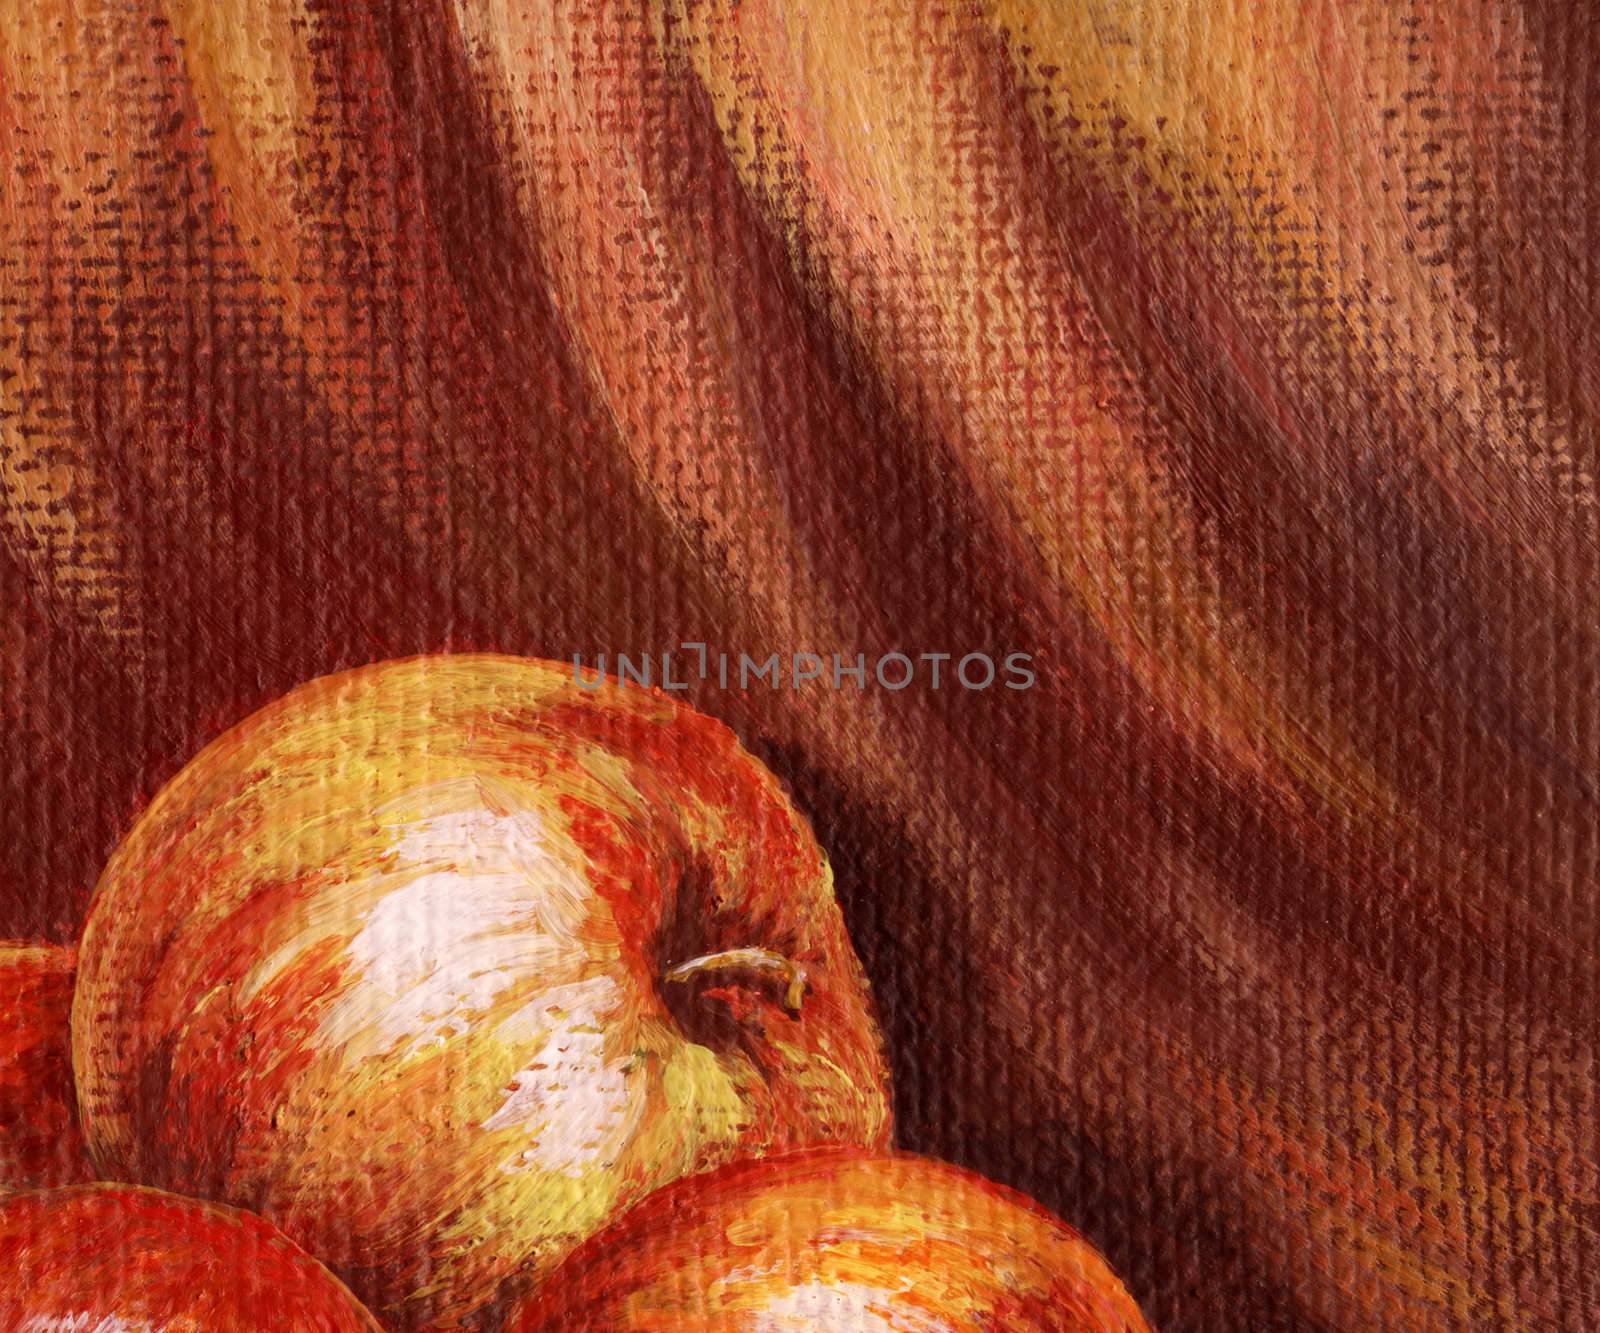 Picture, apples on the background of red cloth. Hand draw painting, oil paints on a canvas